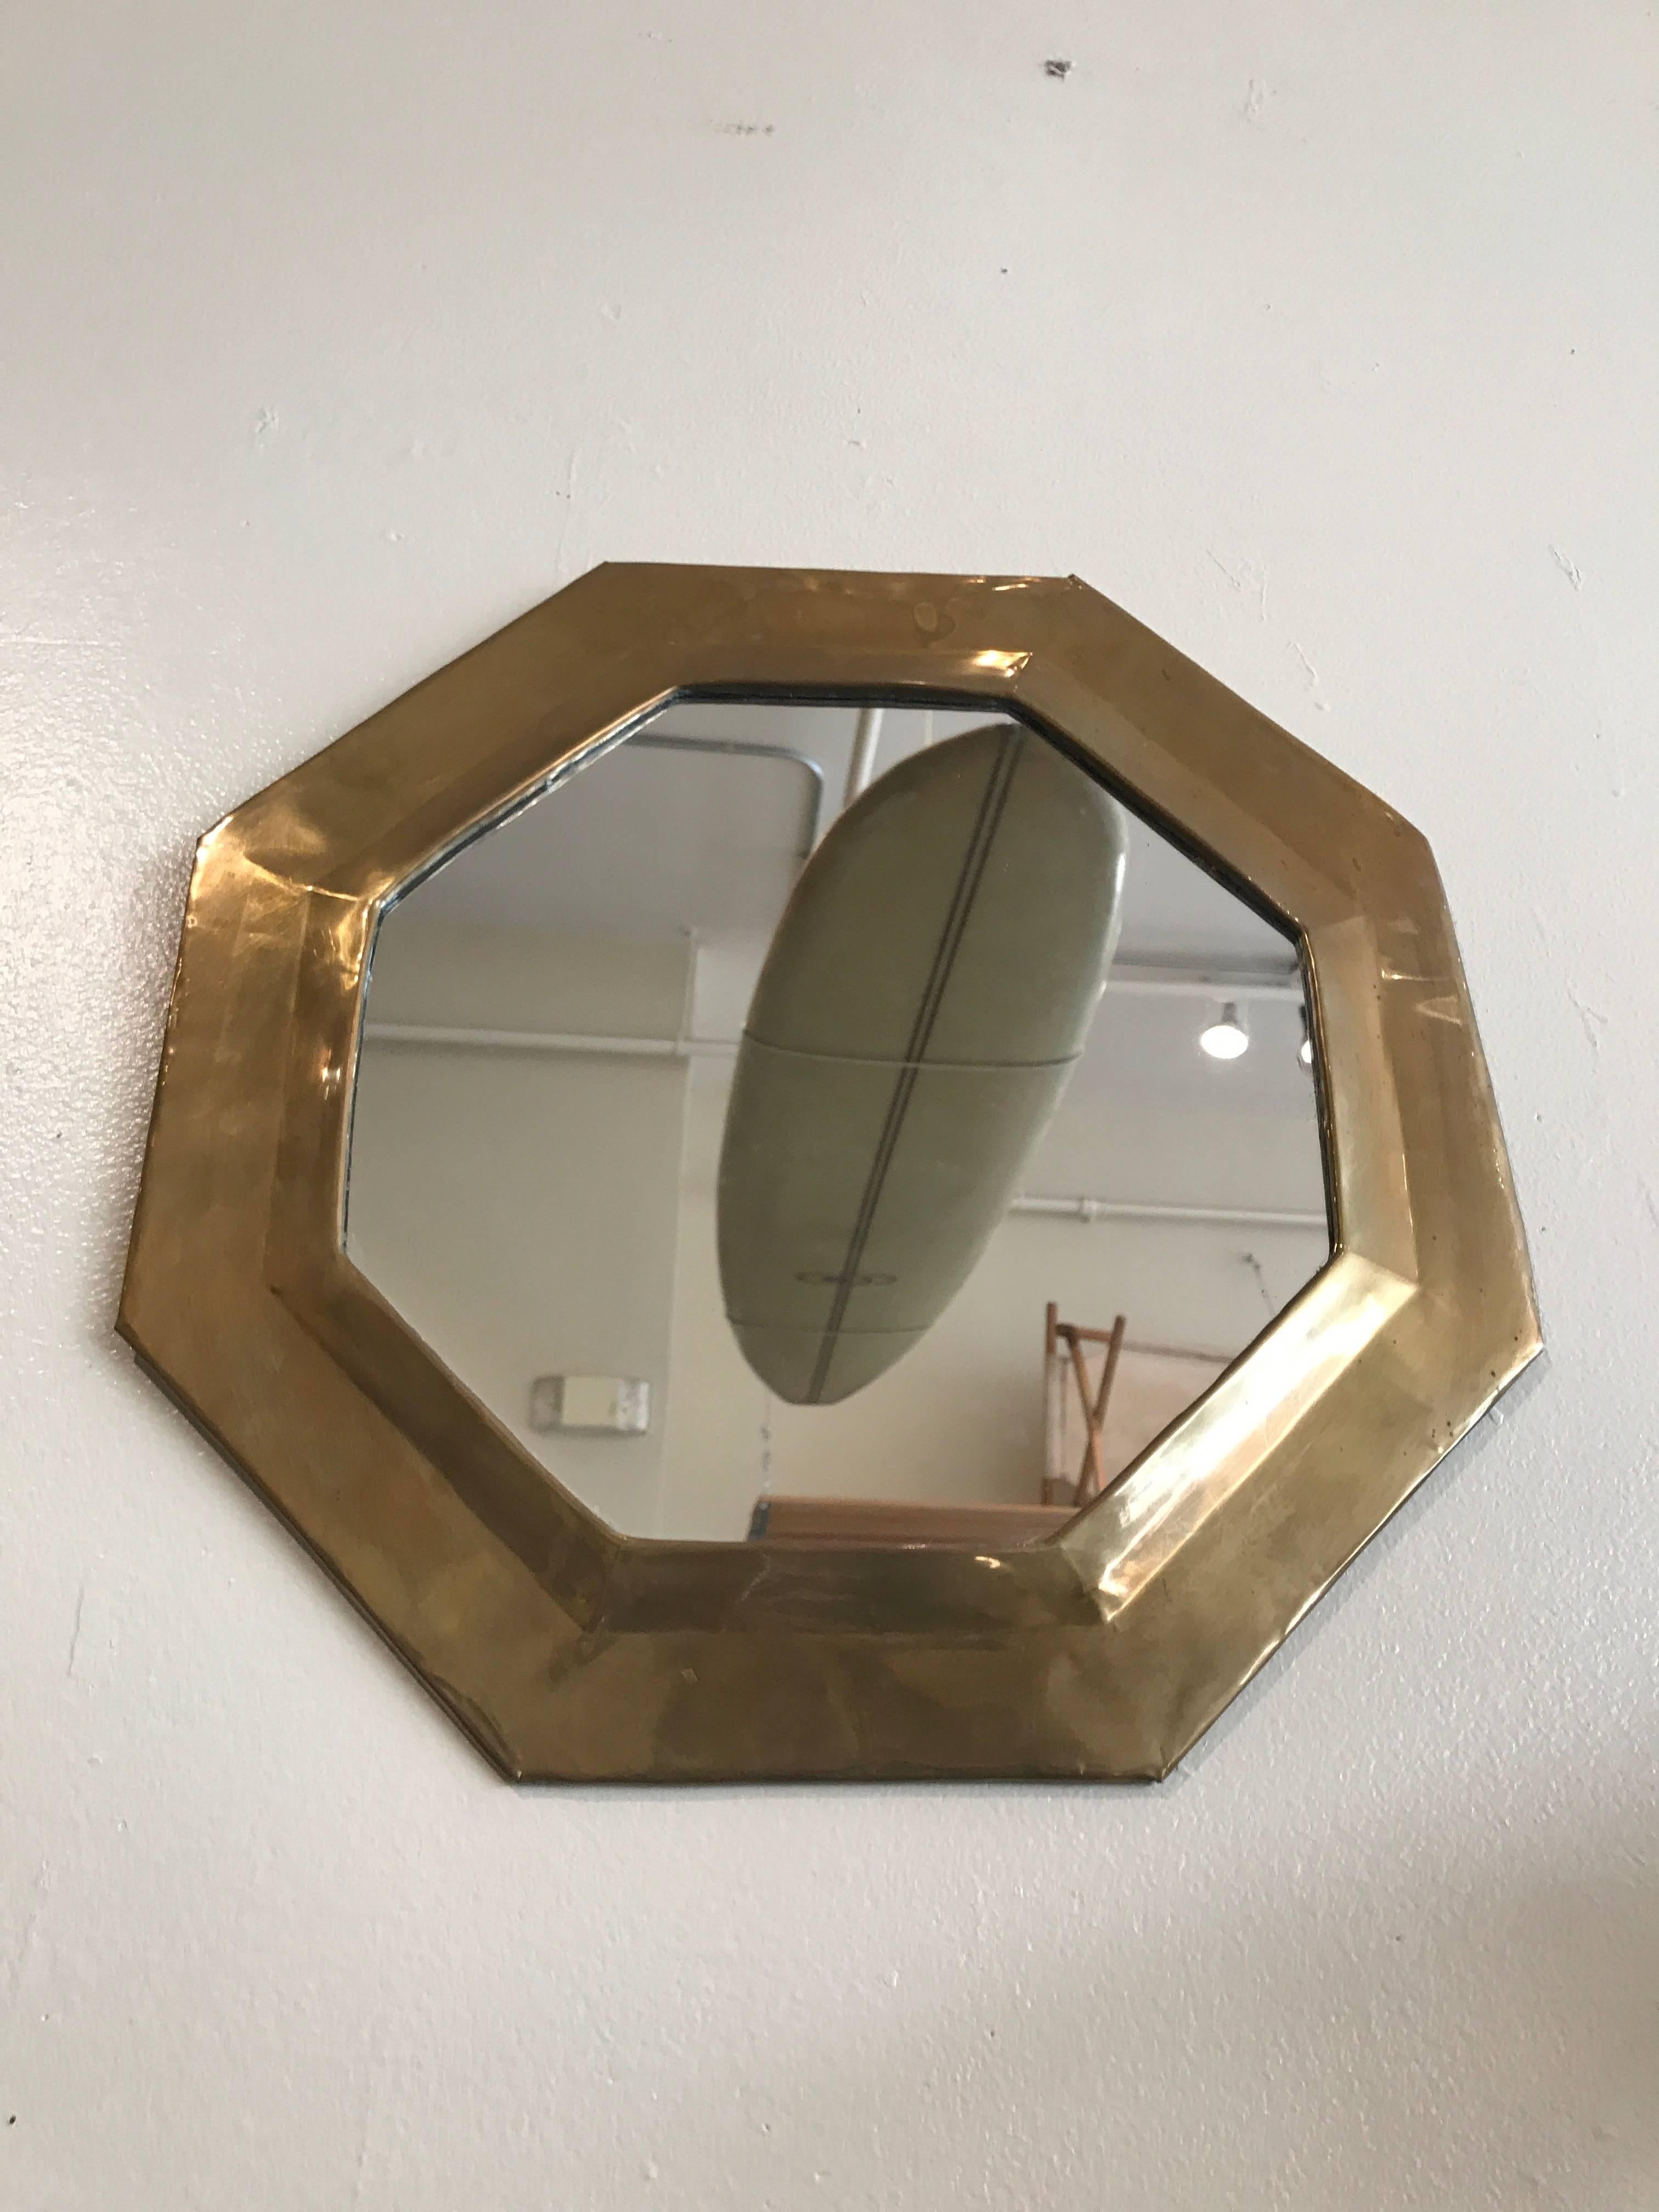 Solid brass octagonal mirror with raised edges towards the centre, nice accent piece.